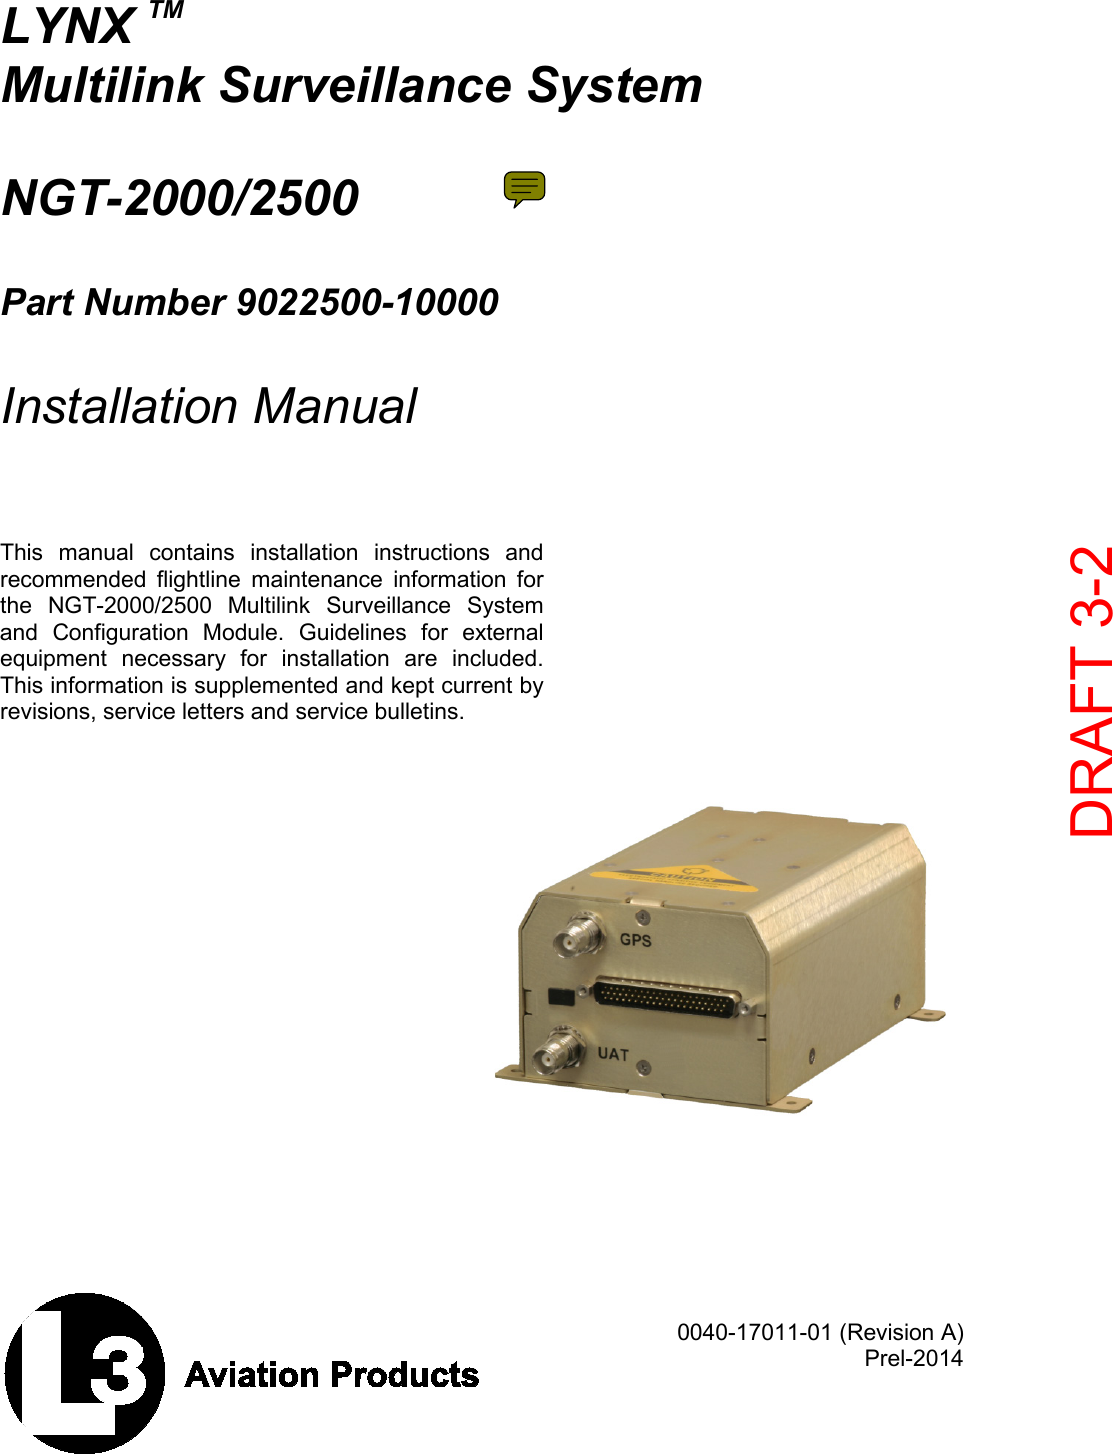      0040-17011-01 (Revision A) Prel-2014    LYNX TM Multilink Surveillance System    NGT-2000/2500   Part Number 9022500-10000   Installation Manual     This manual contains installation instructions and recommended flightline maintenance information for the  NGT-2000/2500 Multilink Surveillance System and  Configuration Module. Guidelines for external equipment necessary for installation are included. This information is supplemented and kept current by revisions, service letters and service bulletins.      DRAFT 3-2